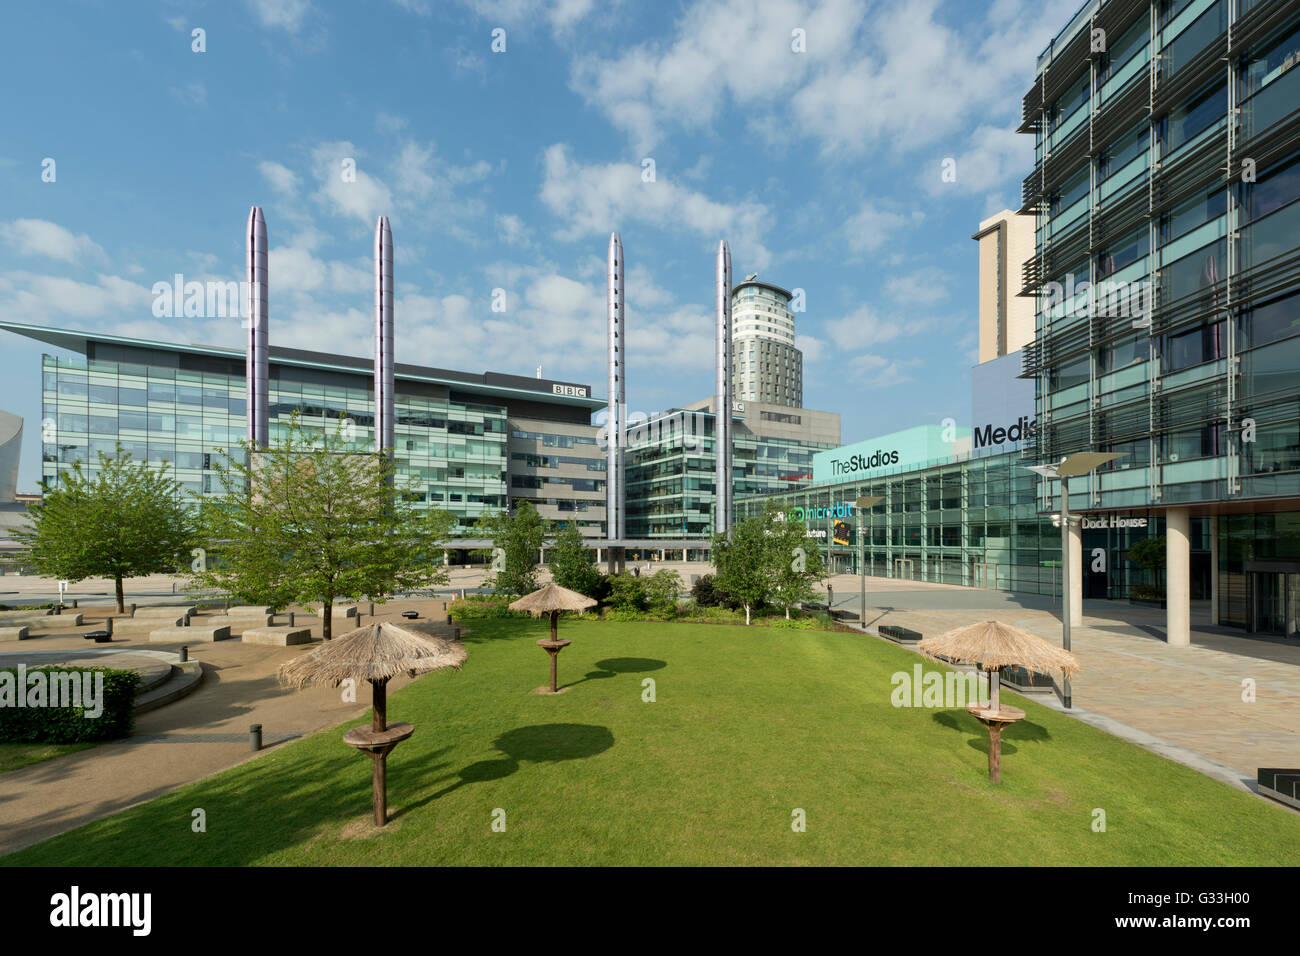 A garden lawn in MediaCityUK, whose tenants list the BBC, ITV, Granada, located in the Salford Quays area of Greater Manchester. Stock Photo